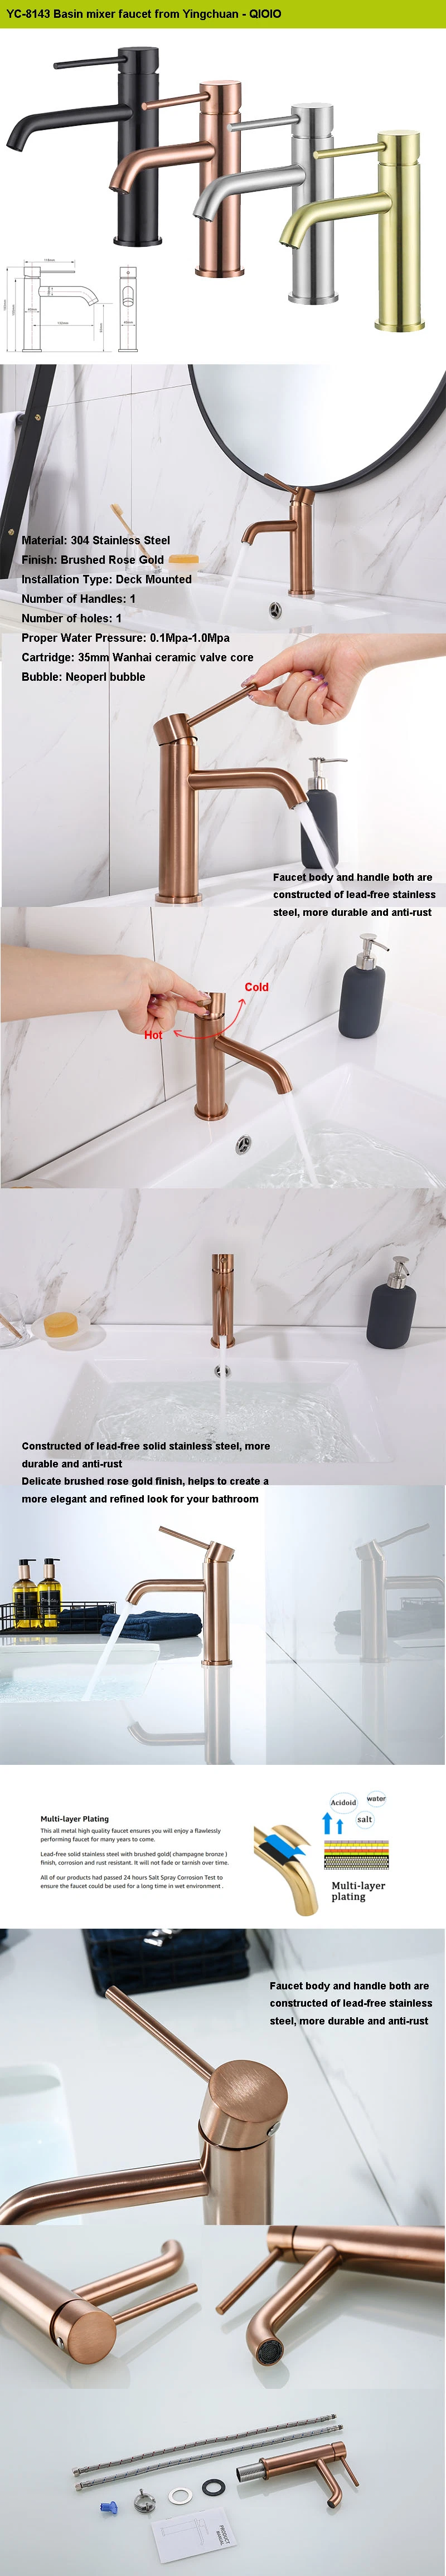 Stainless Steel Safety Mixer Tap Nice Quality Bathroom Basin Faucet